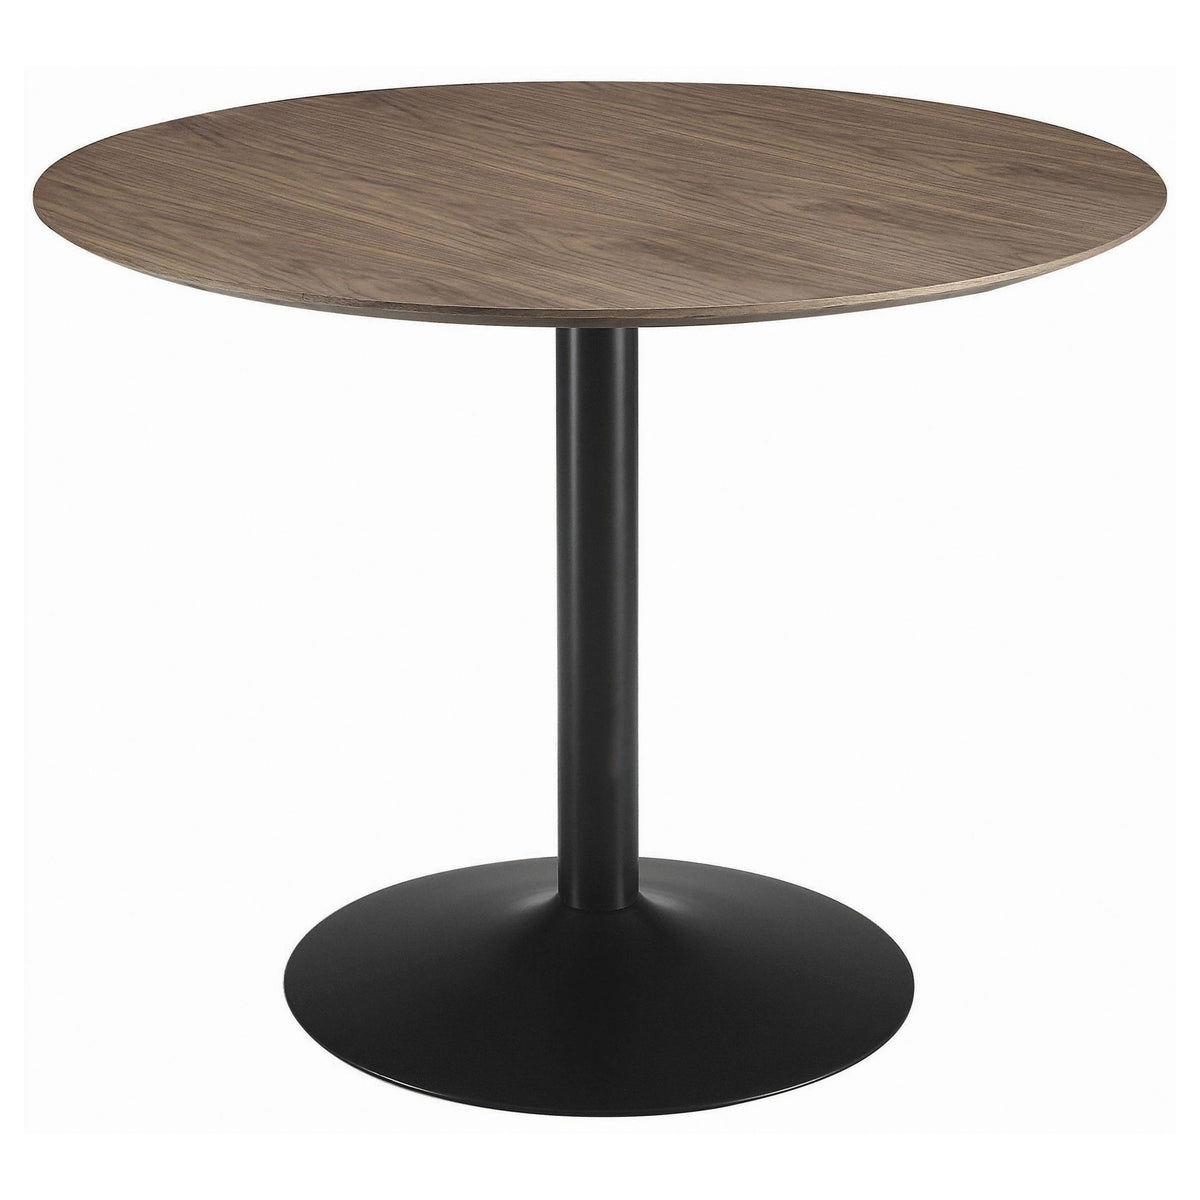 Cora Round Dining Table Walnut and Black Cora Round Dining Table Walnut and Black Half Price Furniture